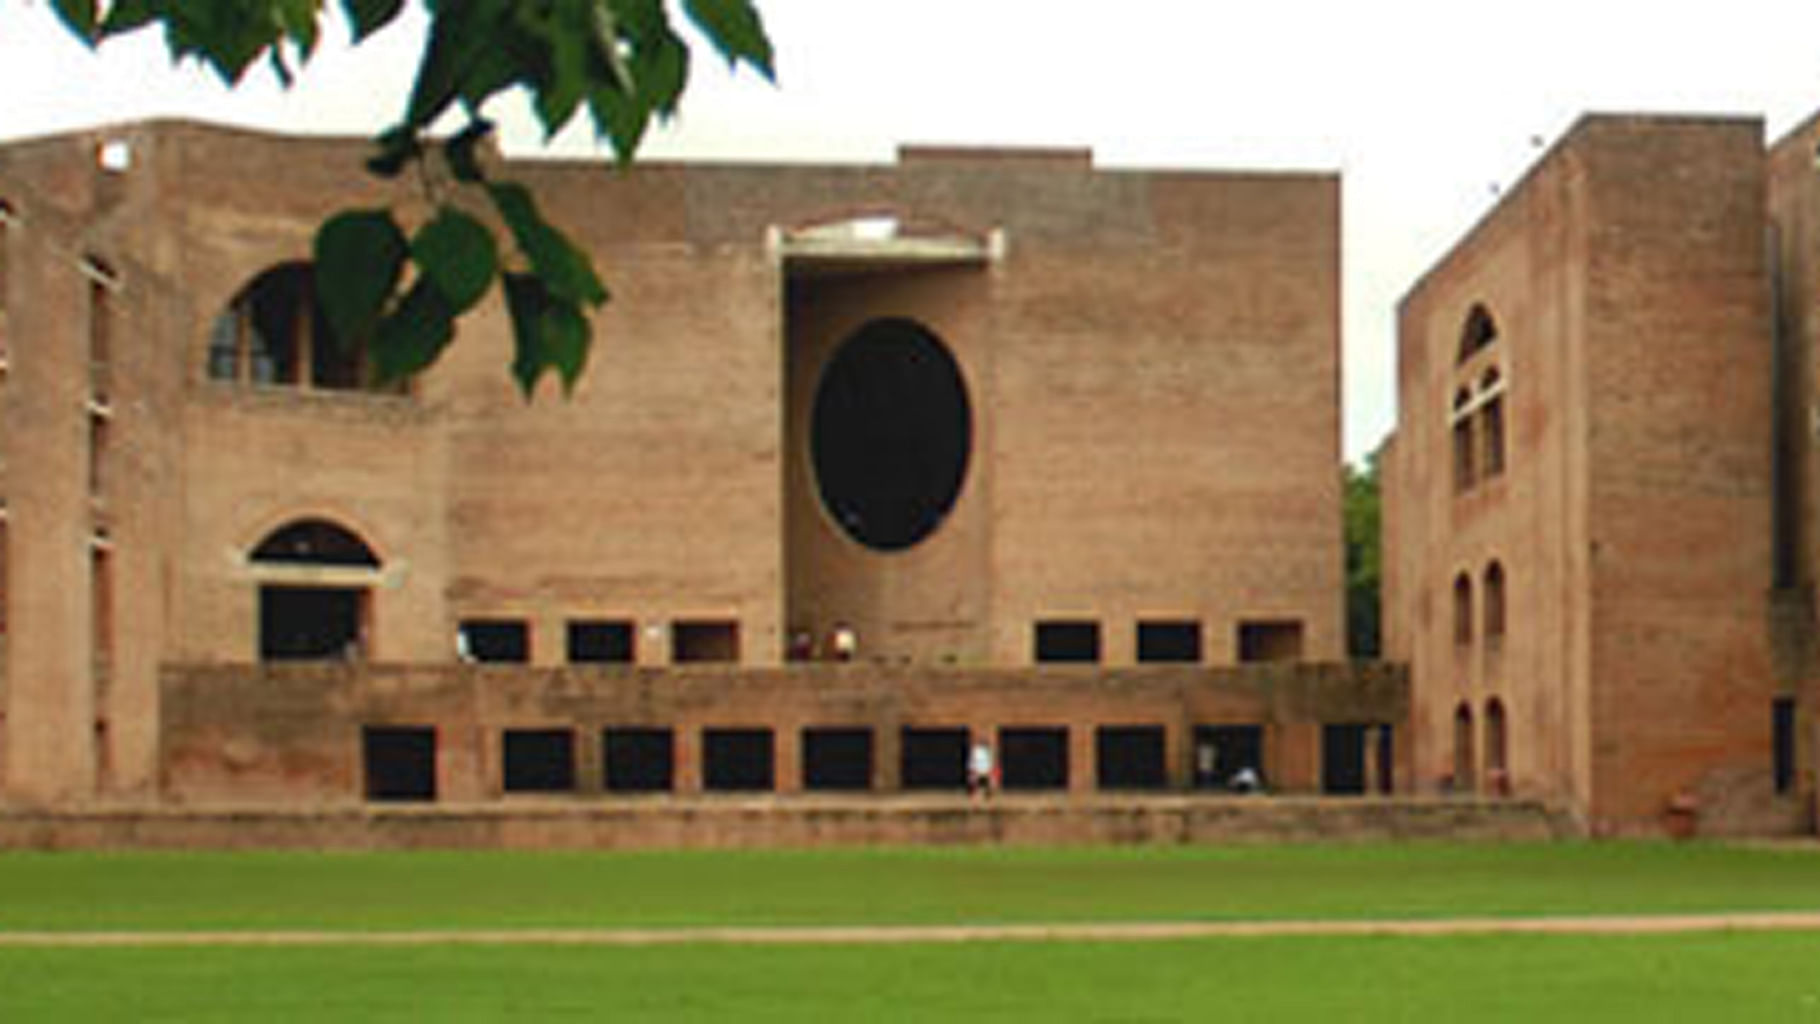 IIM Ahmedabad was ranked at the seventh position, regionally, in the ‘Global MBA’ category.